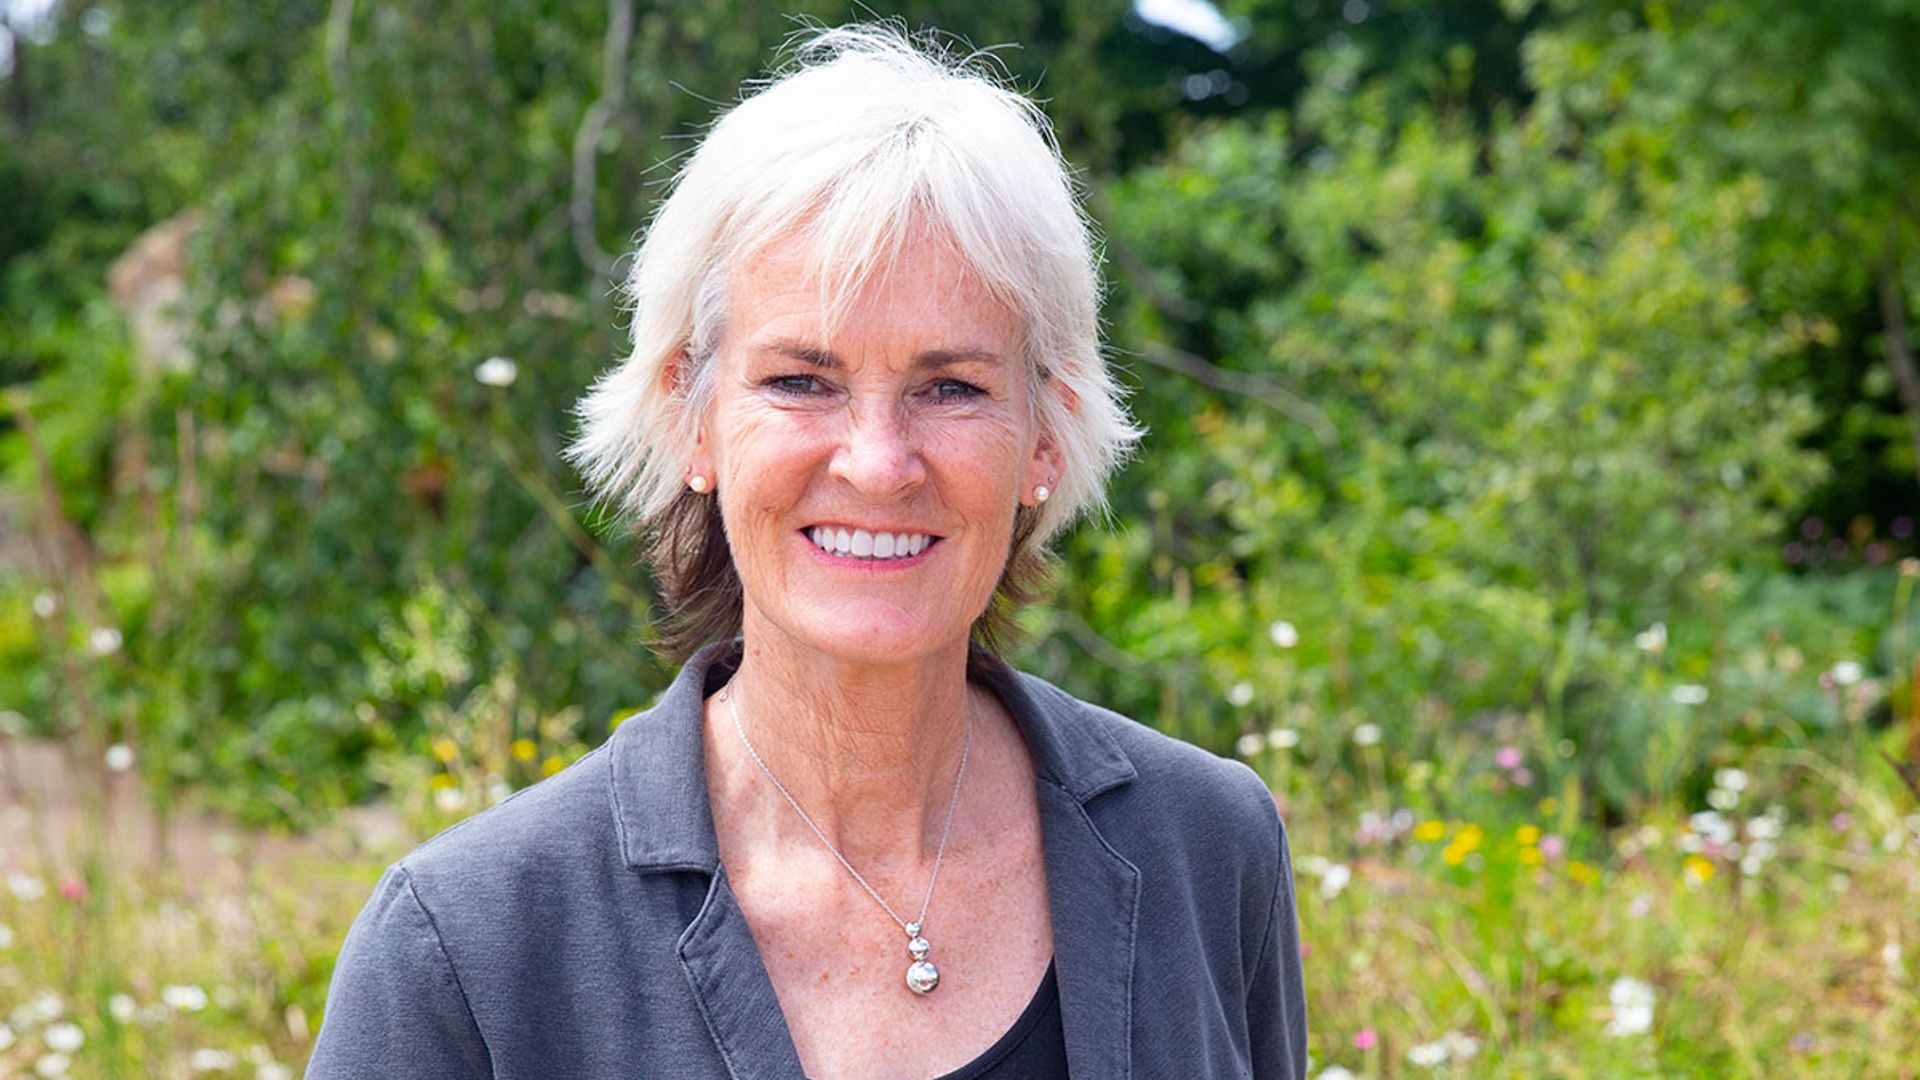 Judy Murray's love life from her marriage to her divorce